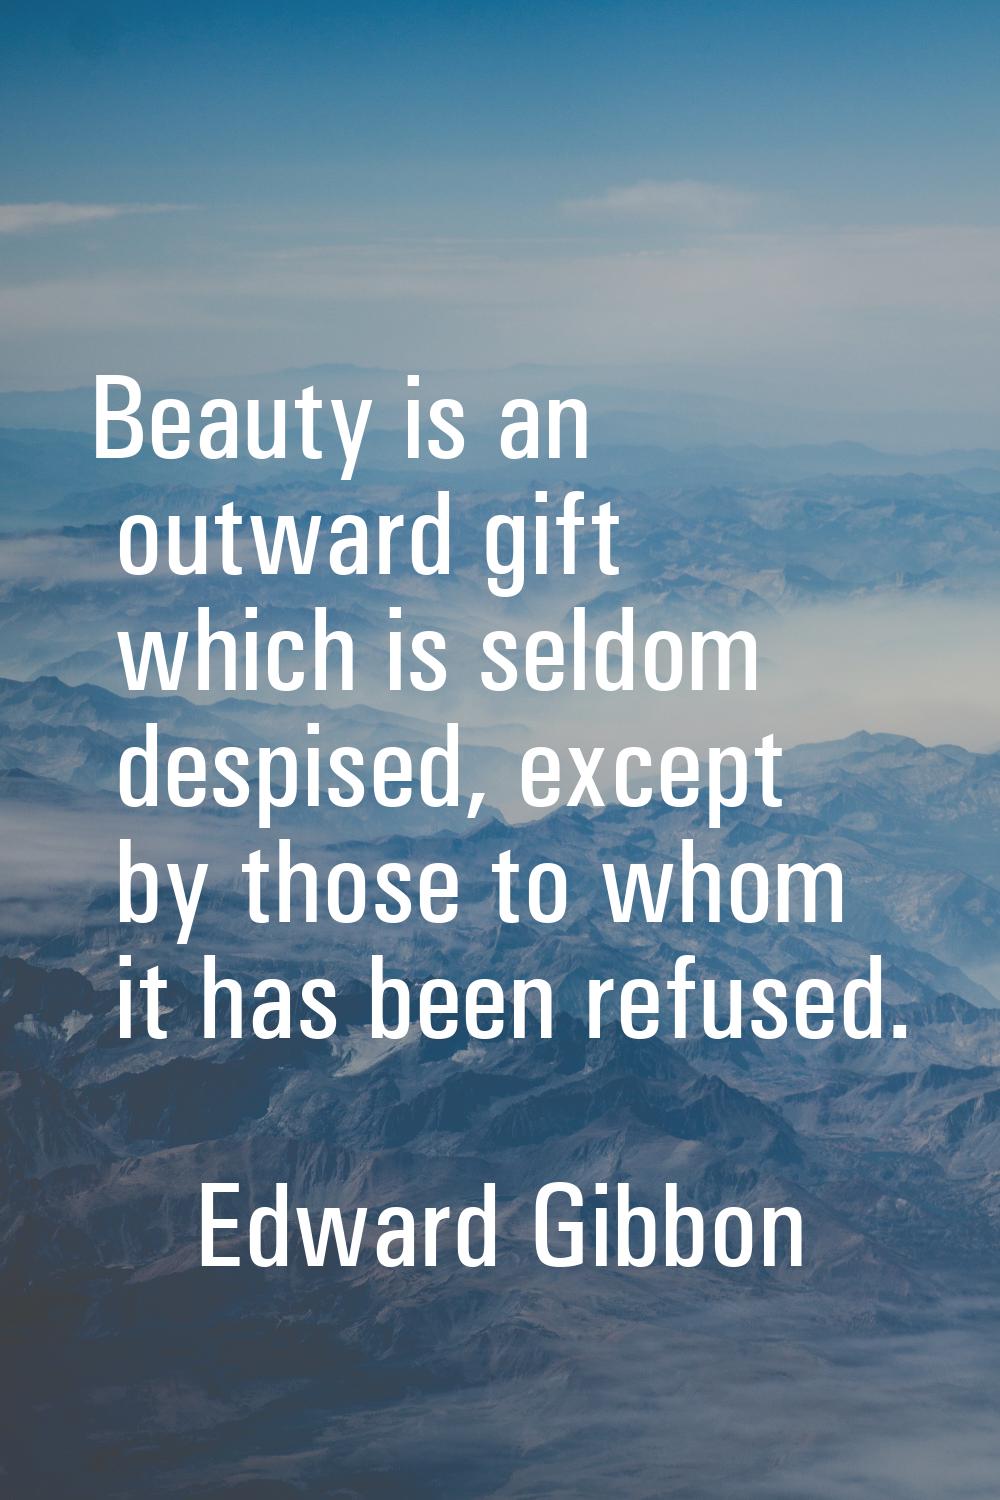 Beauty is an outward gift which is seldom despised, except by those to whom it has been refused.